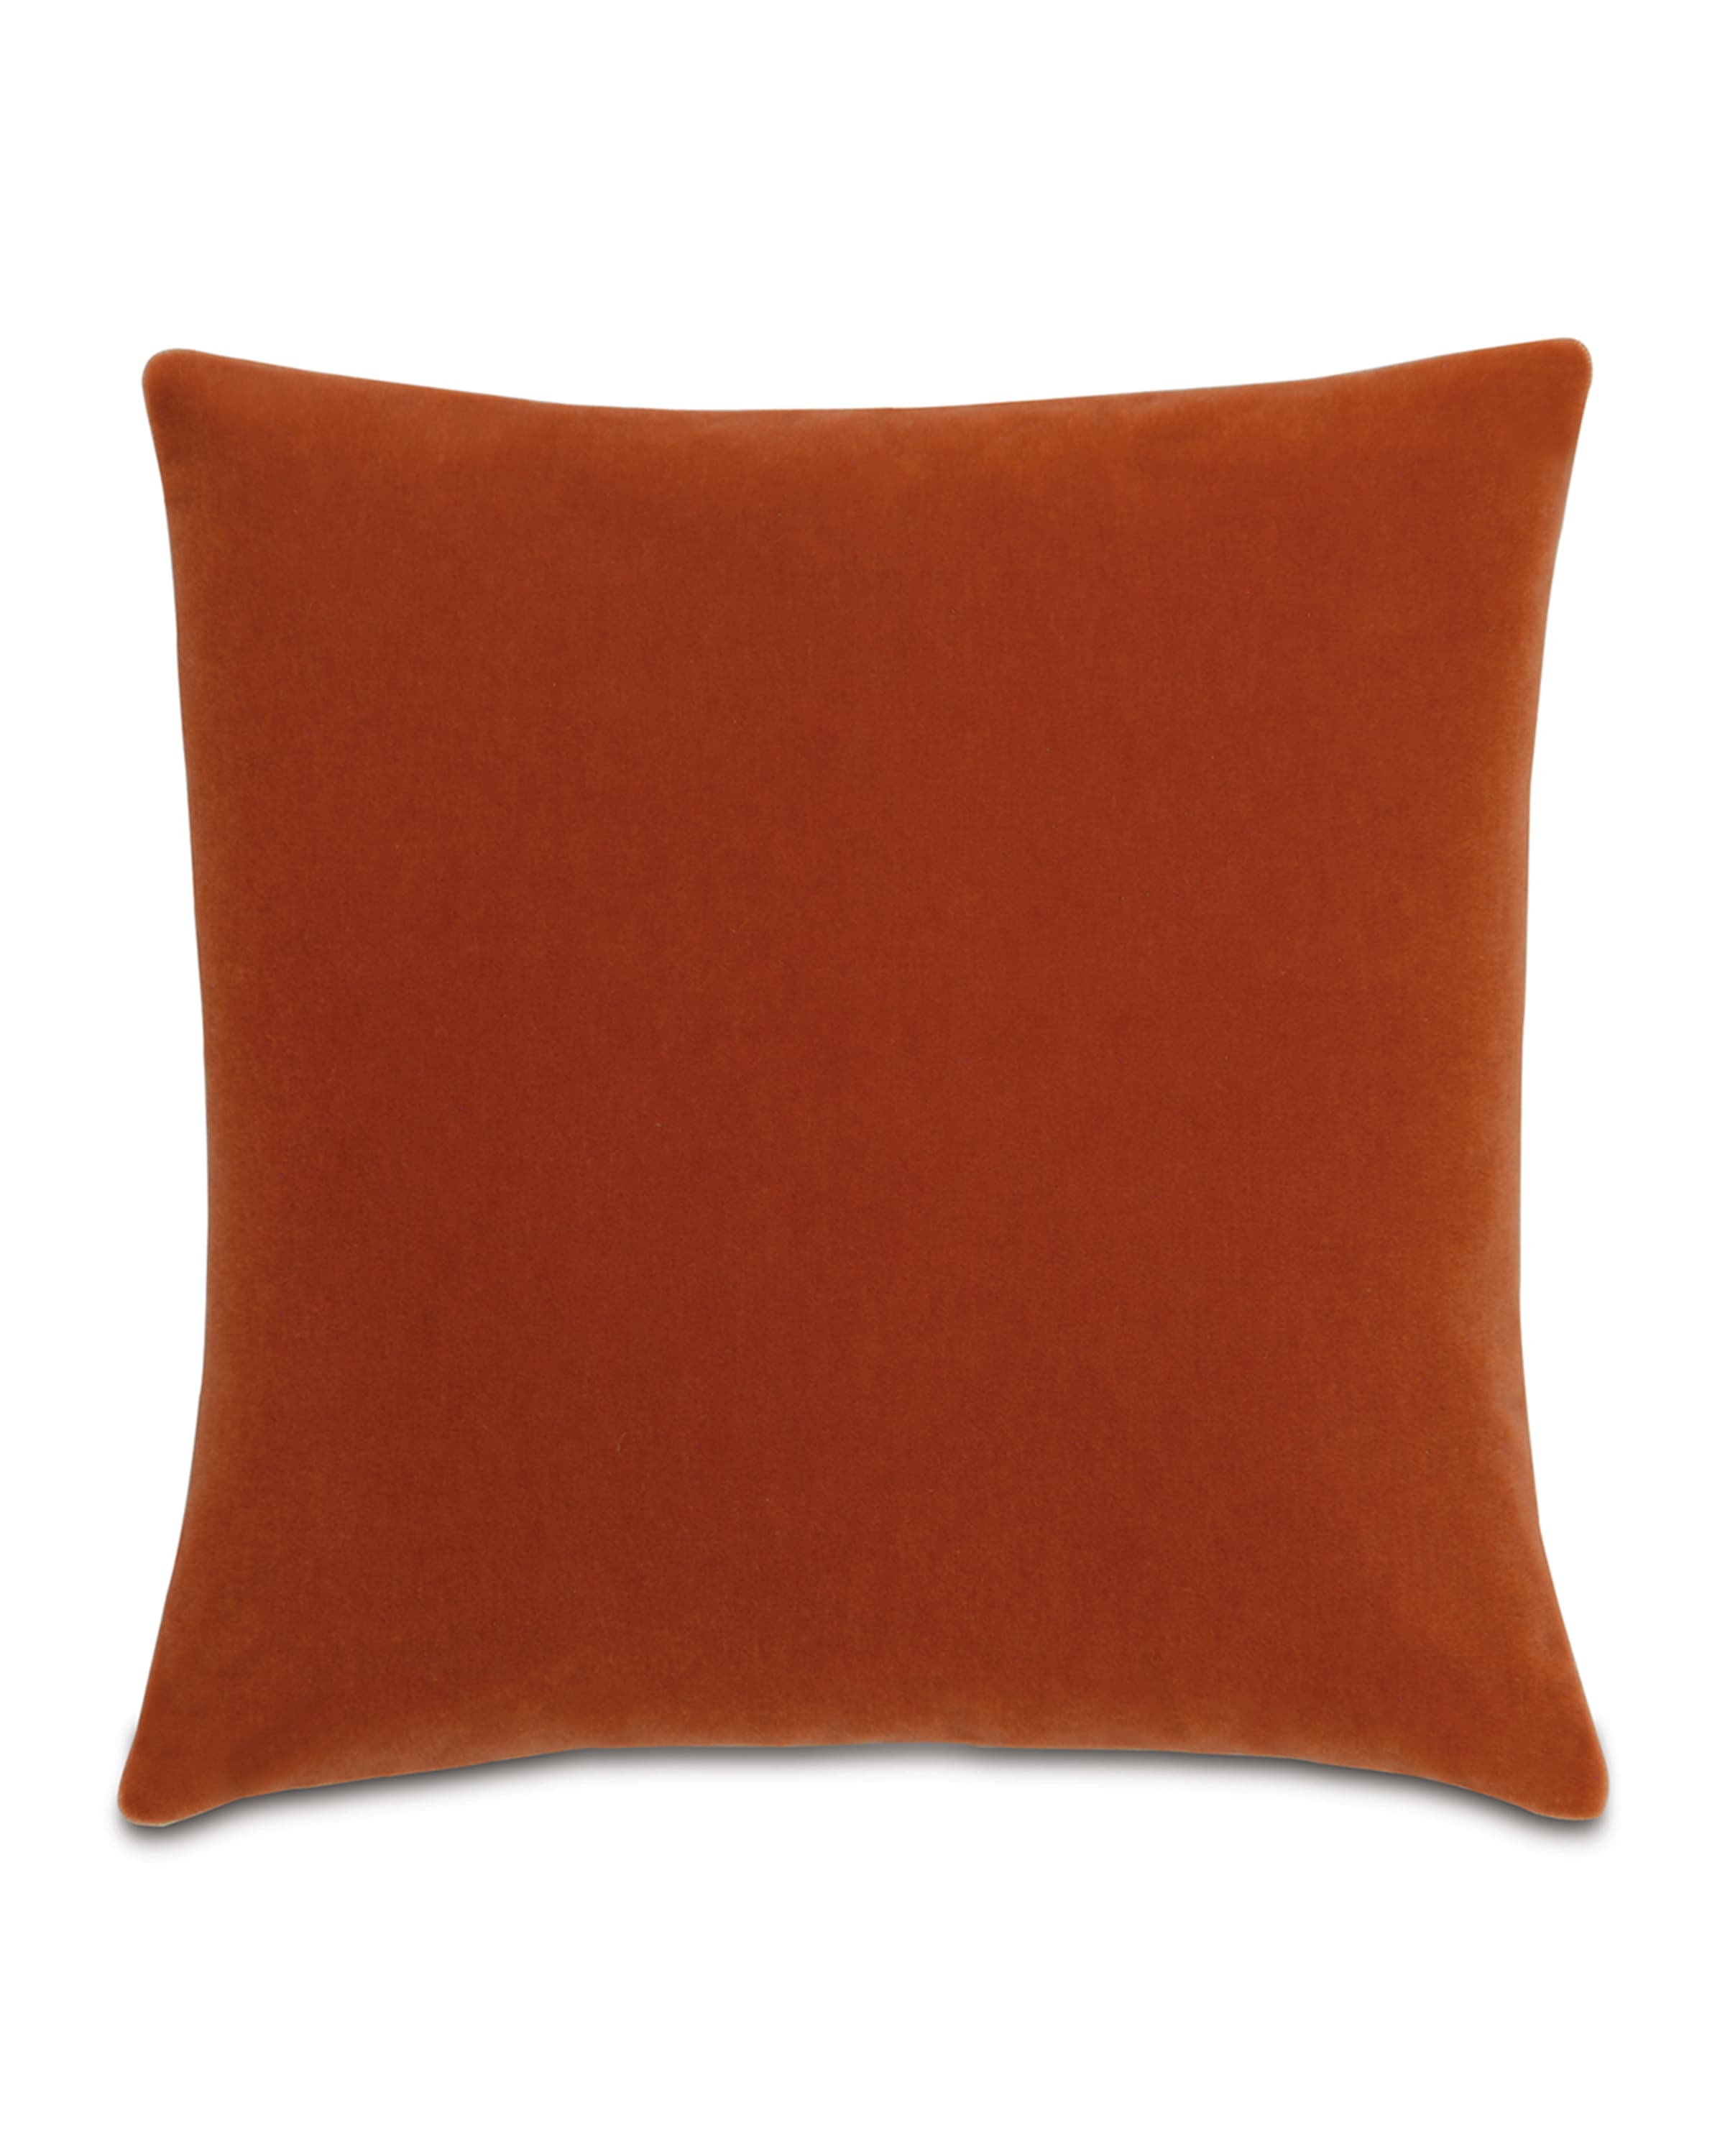 Eastern Accents Bach Decorative Pillow